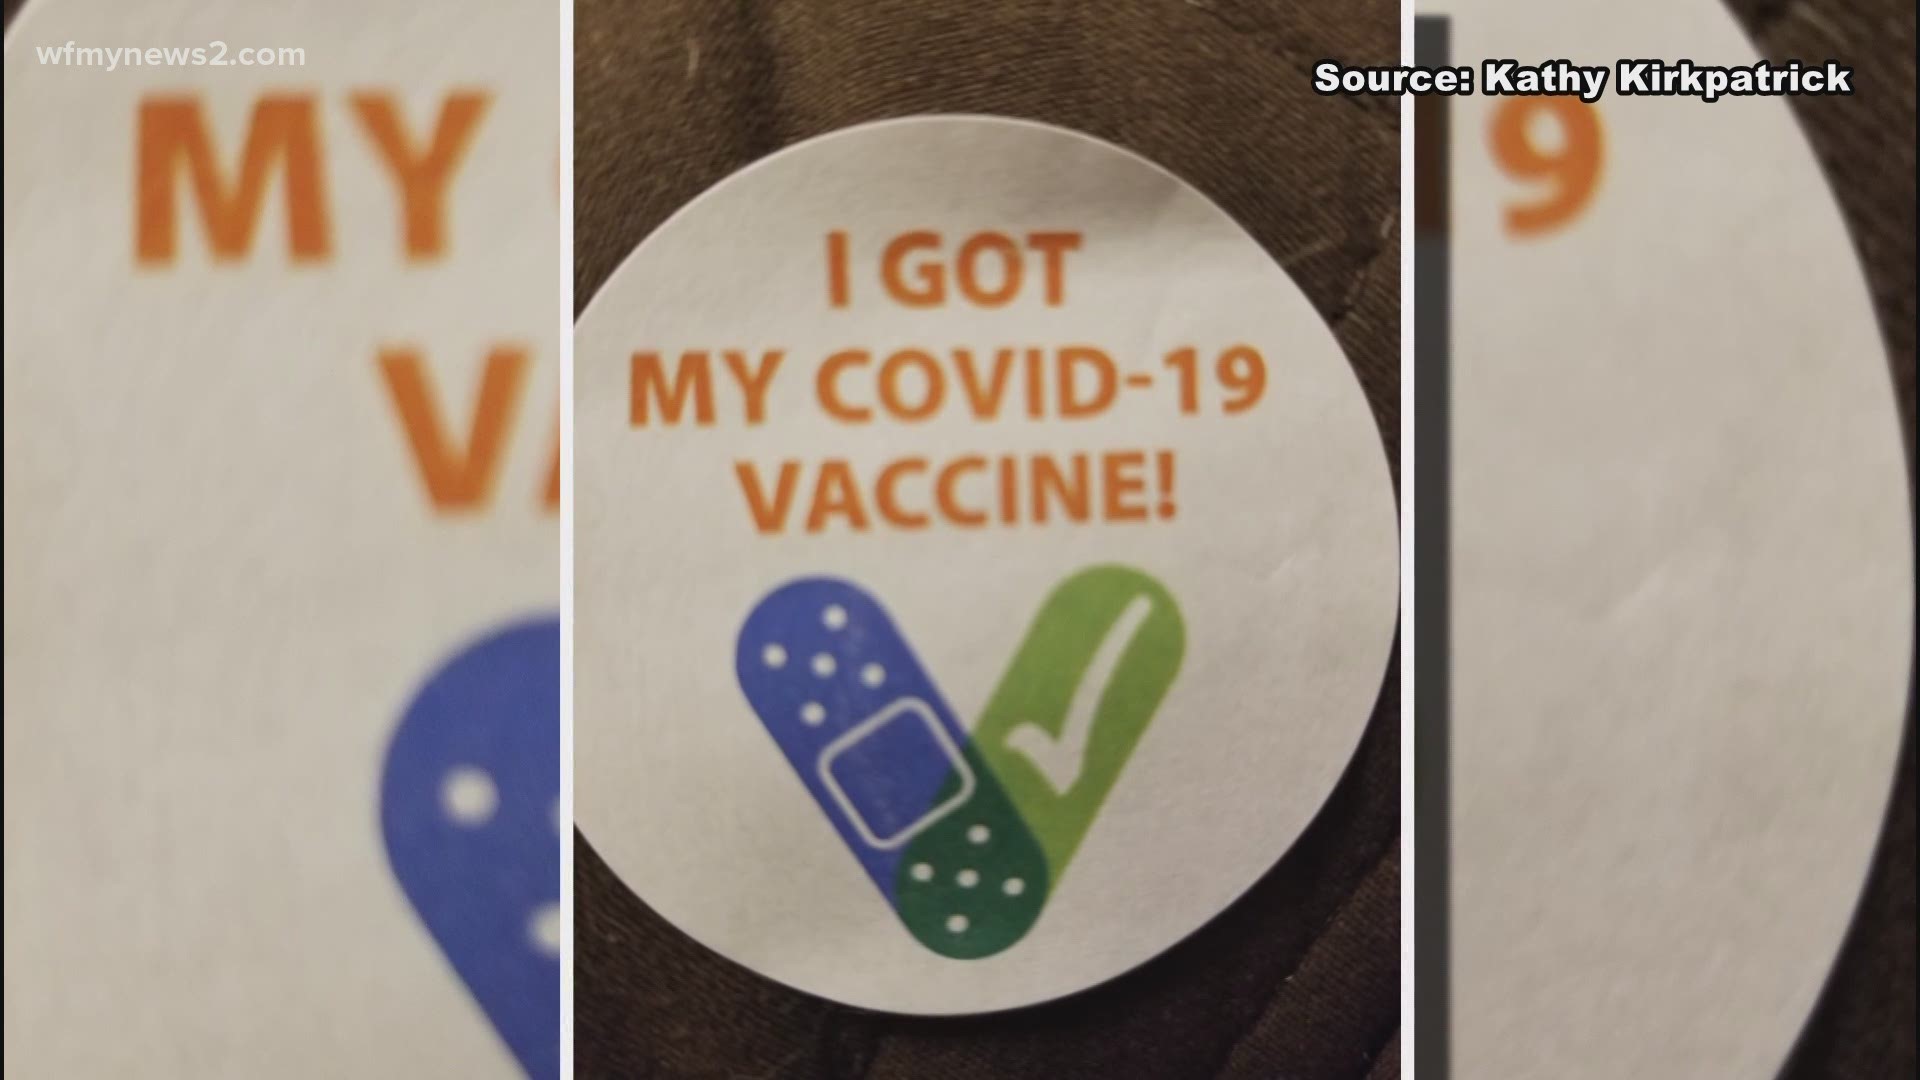 Cone Health announced they would have to reschedule 10,000 vaccine appointments on Jan. 22 after receiving no doses from the state that week.